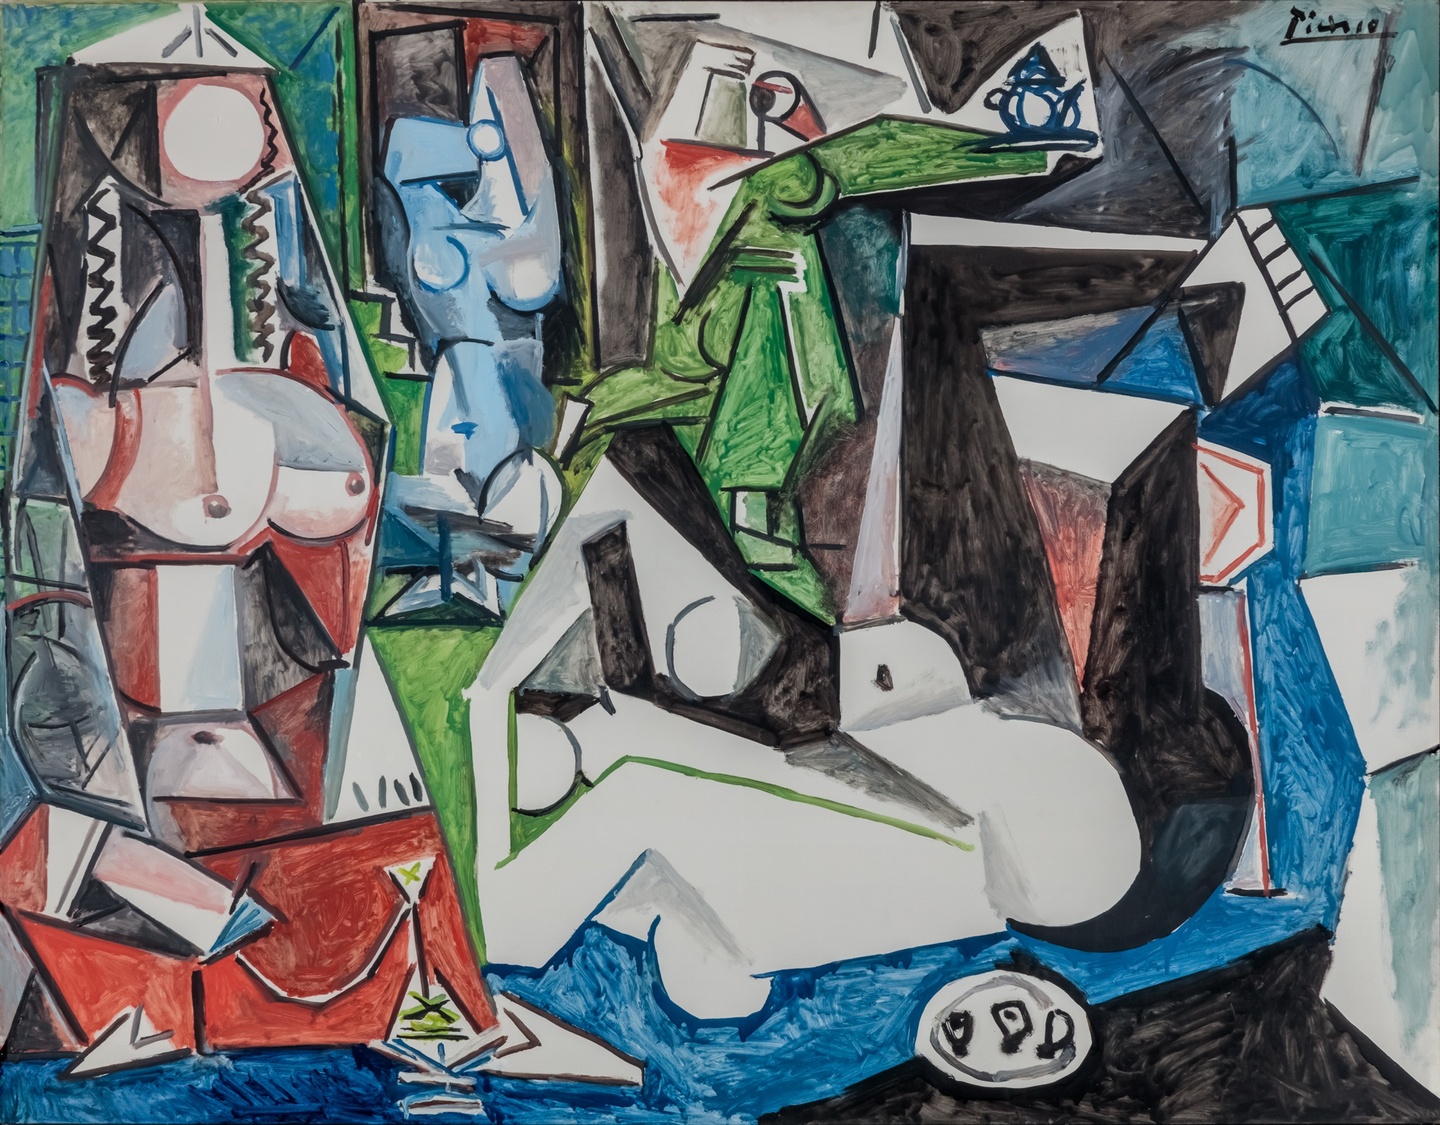 Bodies in various positions, broken up into fragments and depicted in red, blue, green, white, and black planes